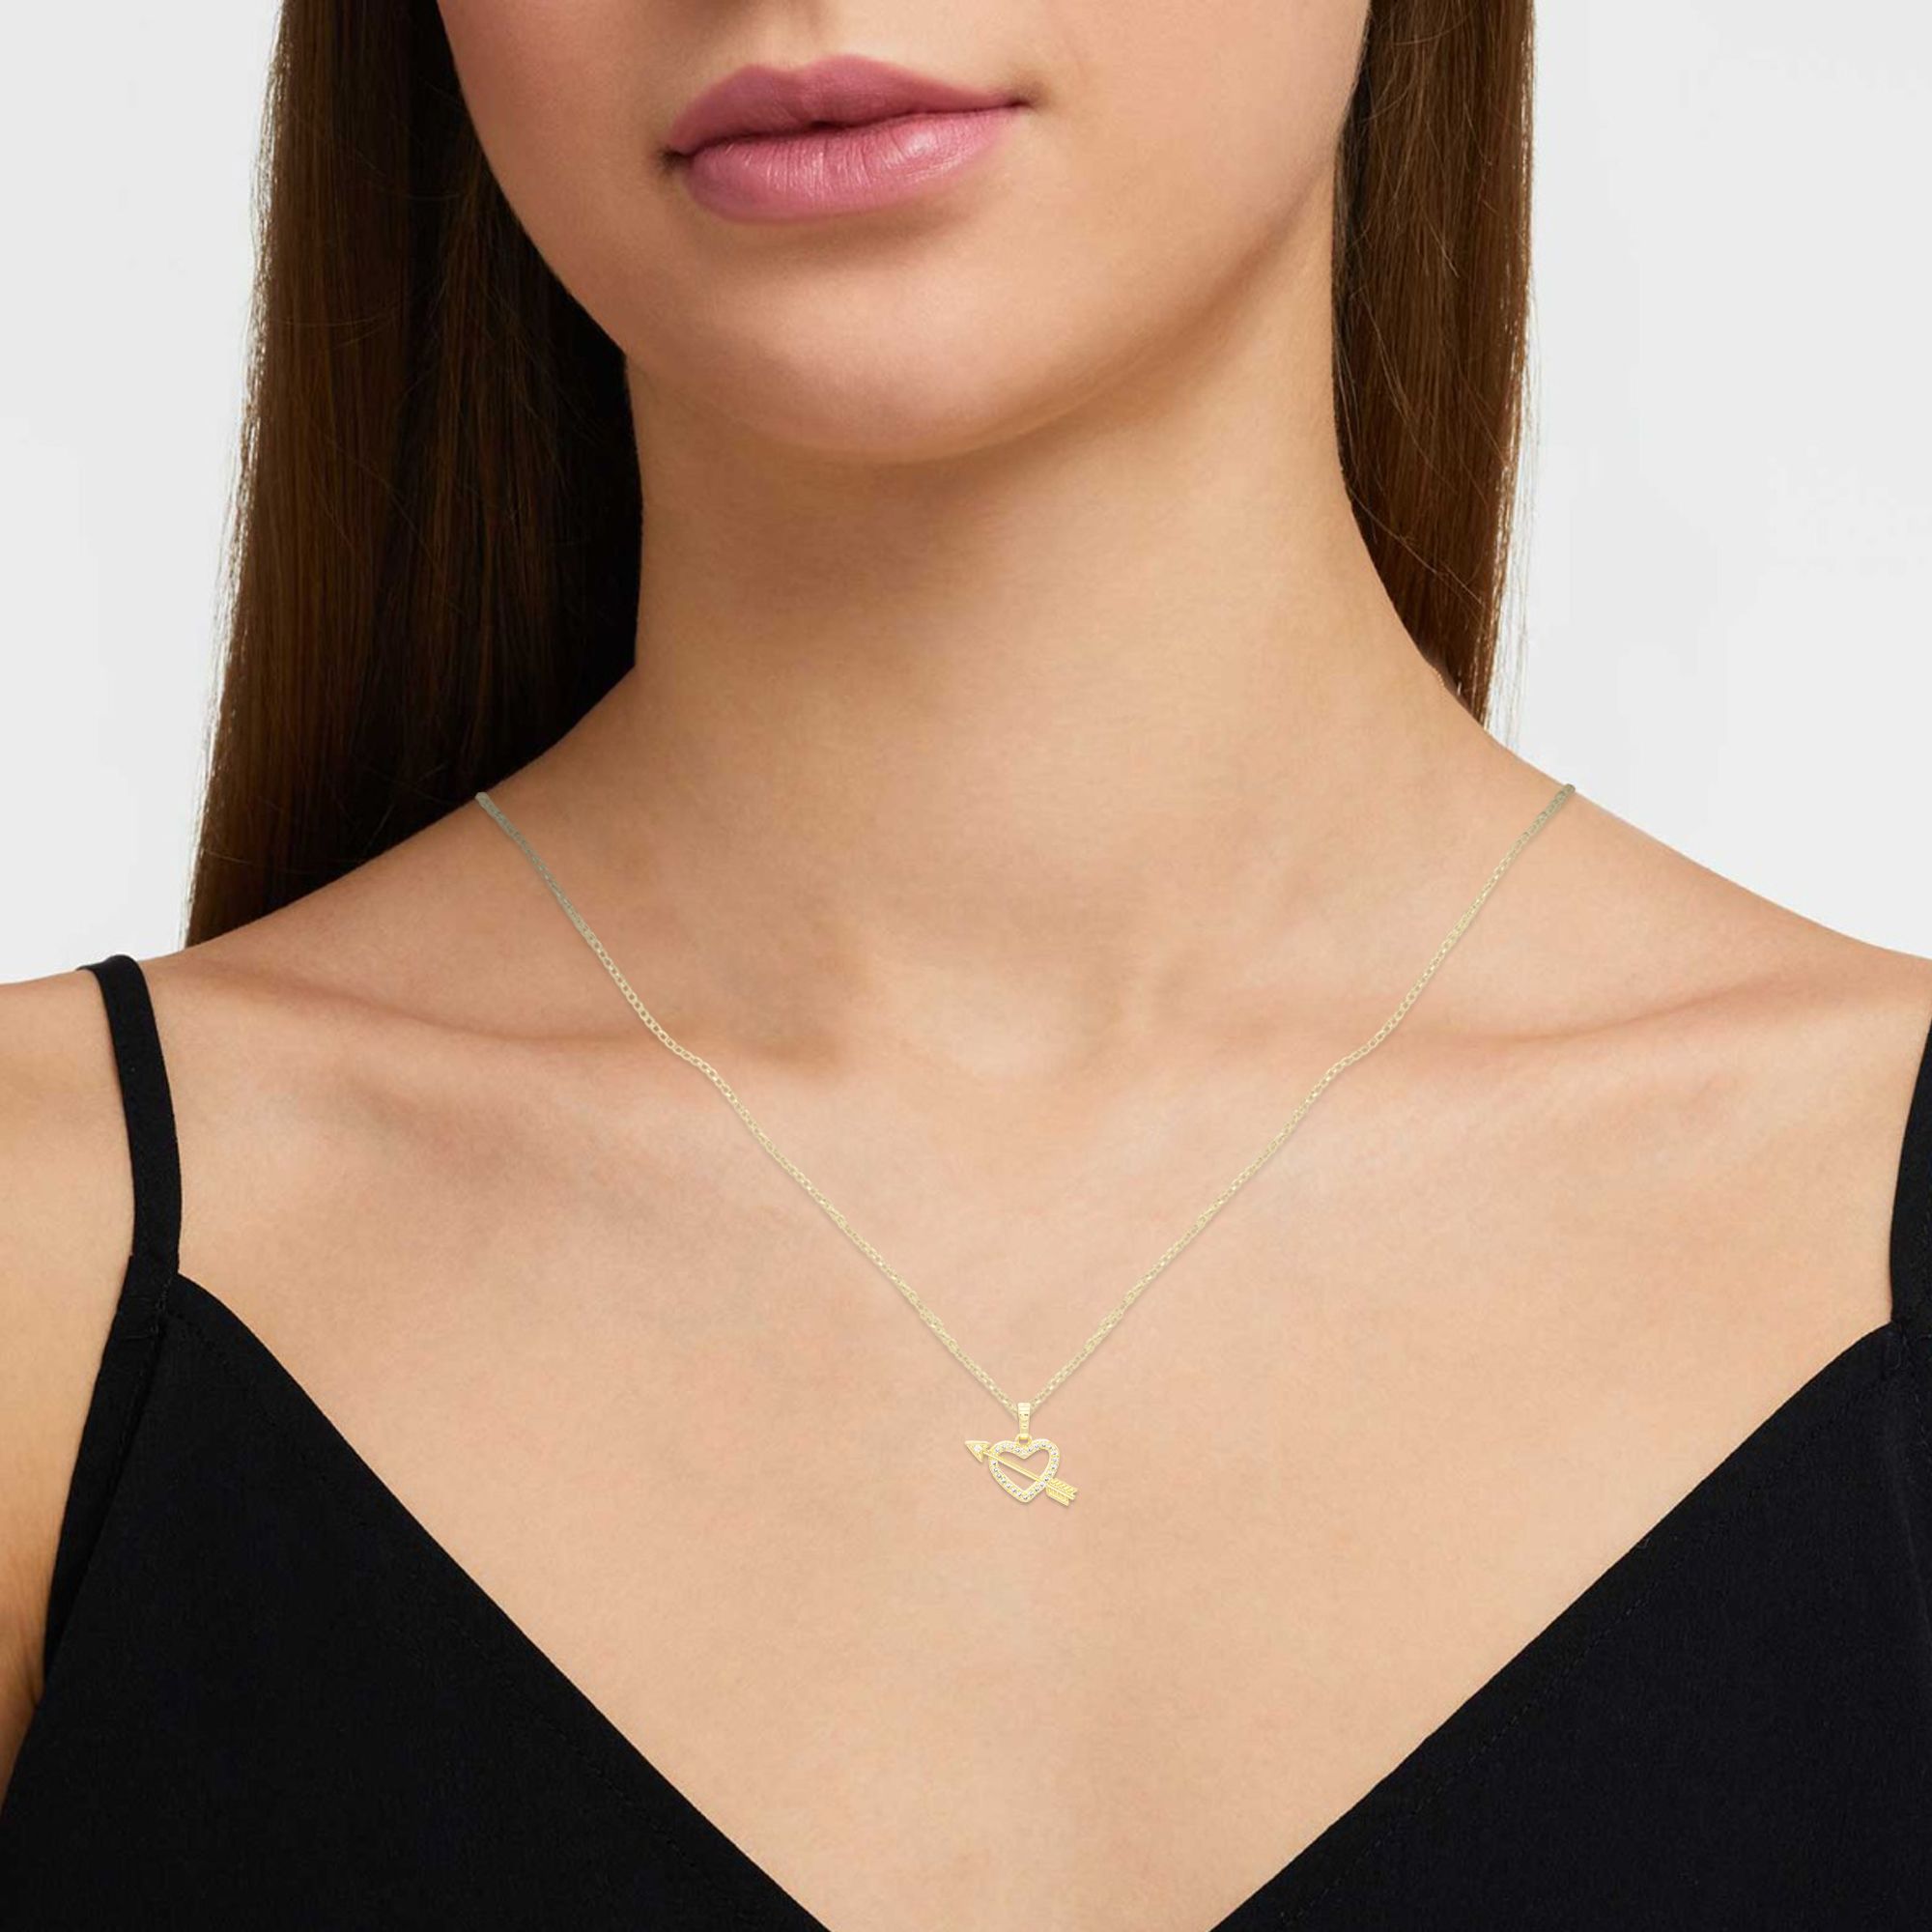 Cubic Zirconia 14K Gold Filled Heart With Arrow Pendant Necklace Set